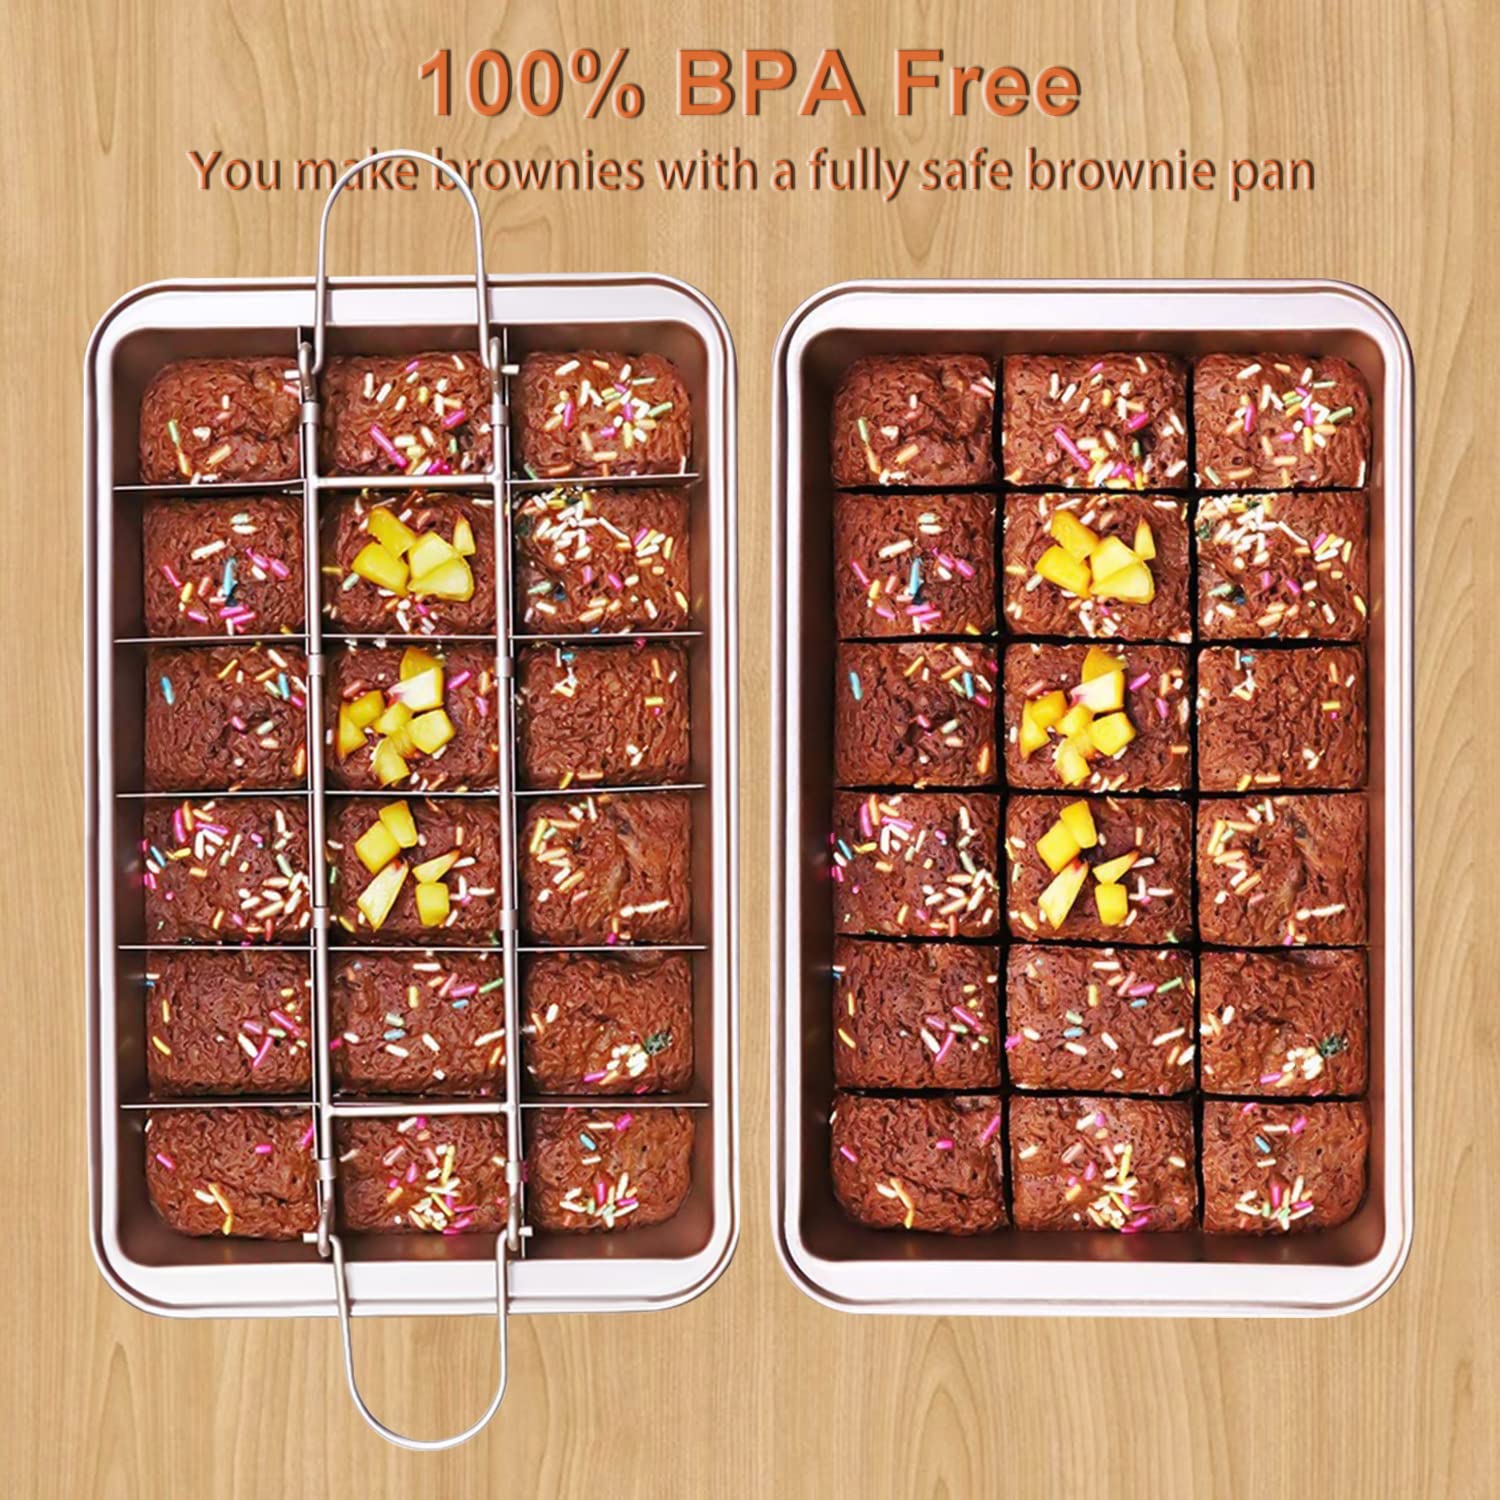 WSNB Brownie Pan, 18 Pre-Slicer Carbon Steel Baking Pans, Brownie Cutter, Brownie Tray with Oil Brush, Pre-Cut Square Molds for Oven Baking Cupcakes, Fudge & Chocolate 12 X 8 X 2 inches